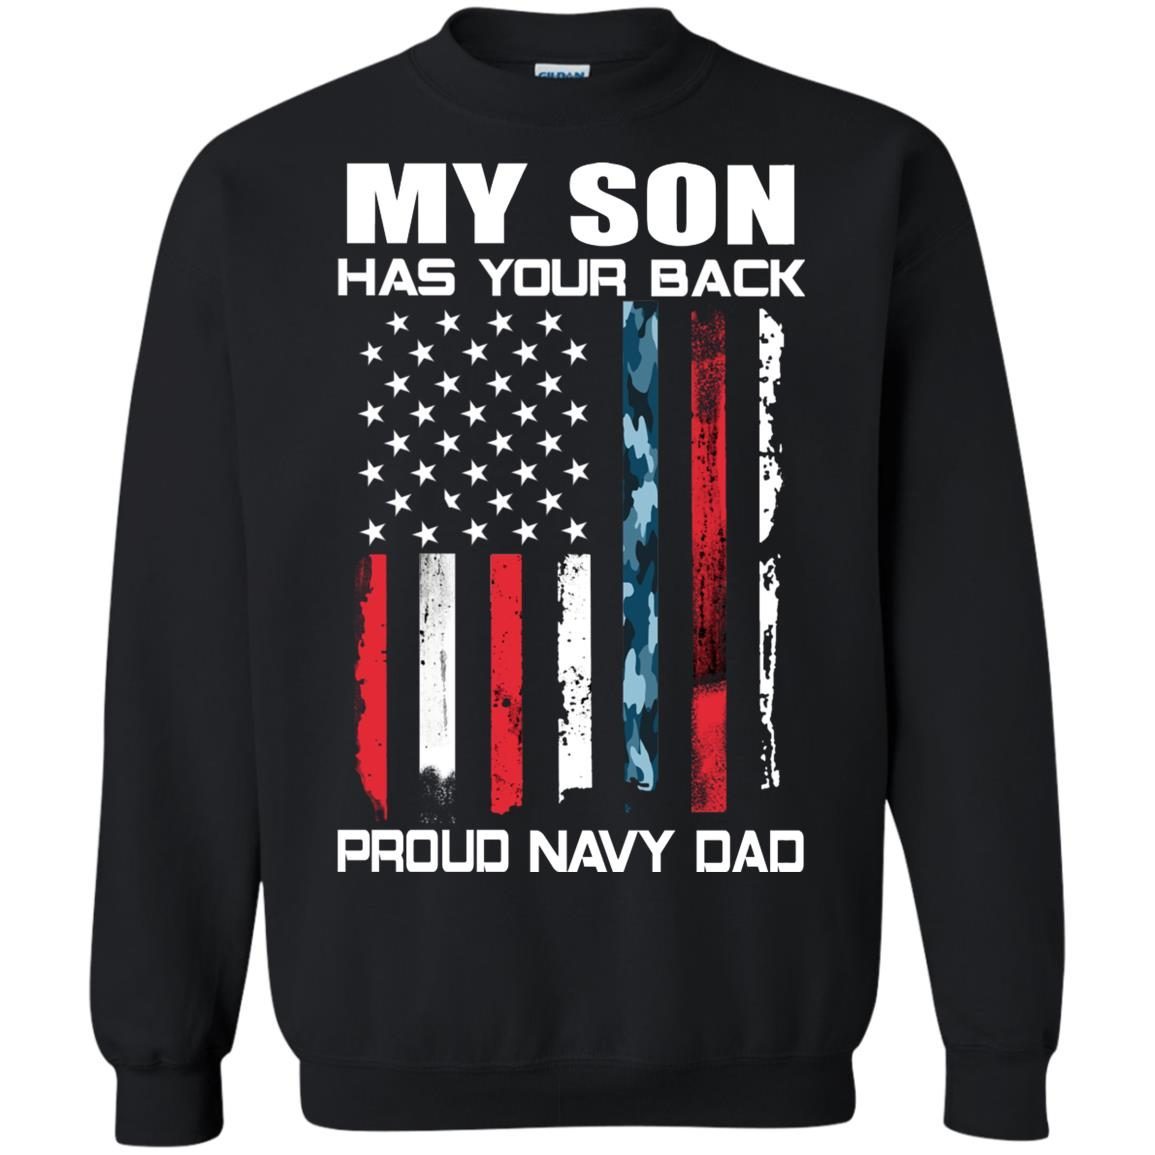 My Son Has Your Back Proud Navy Dad Shirt